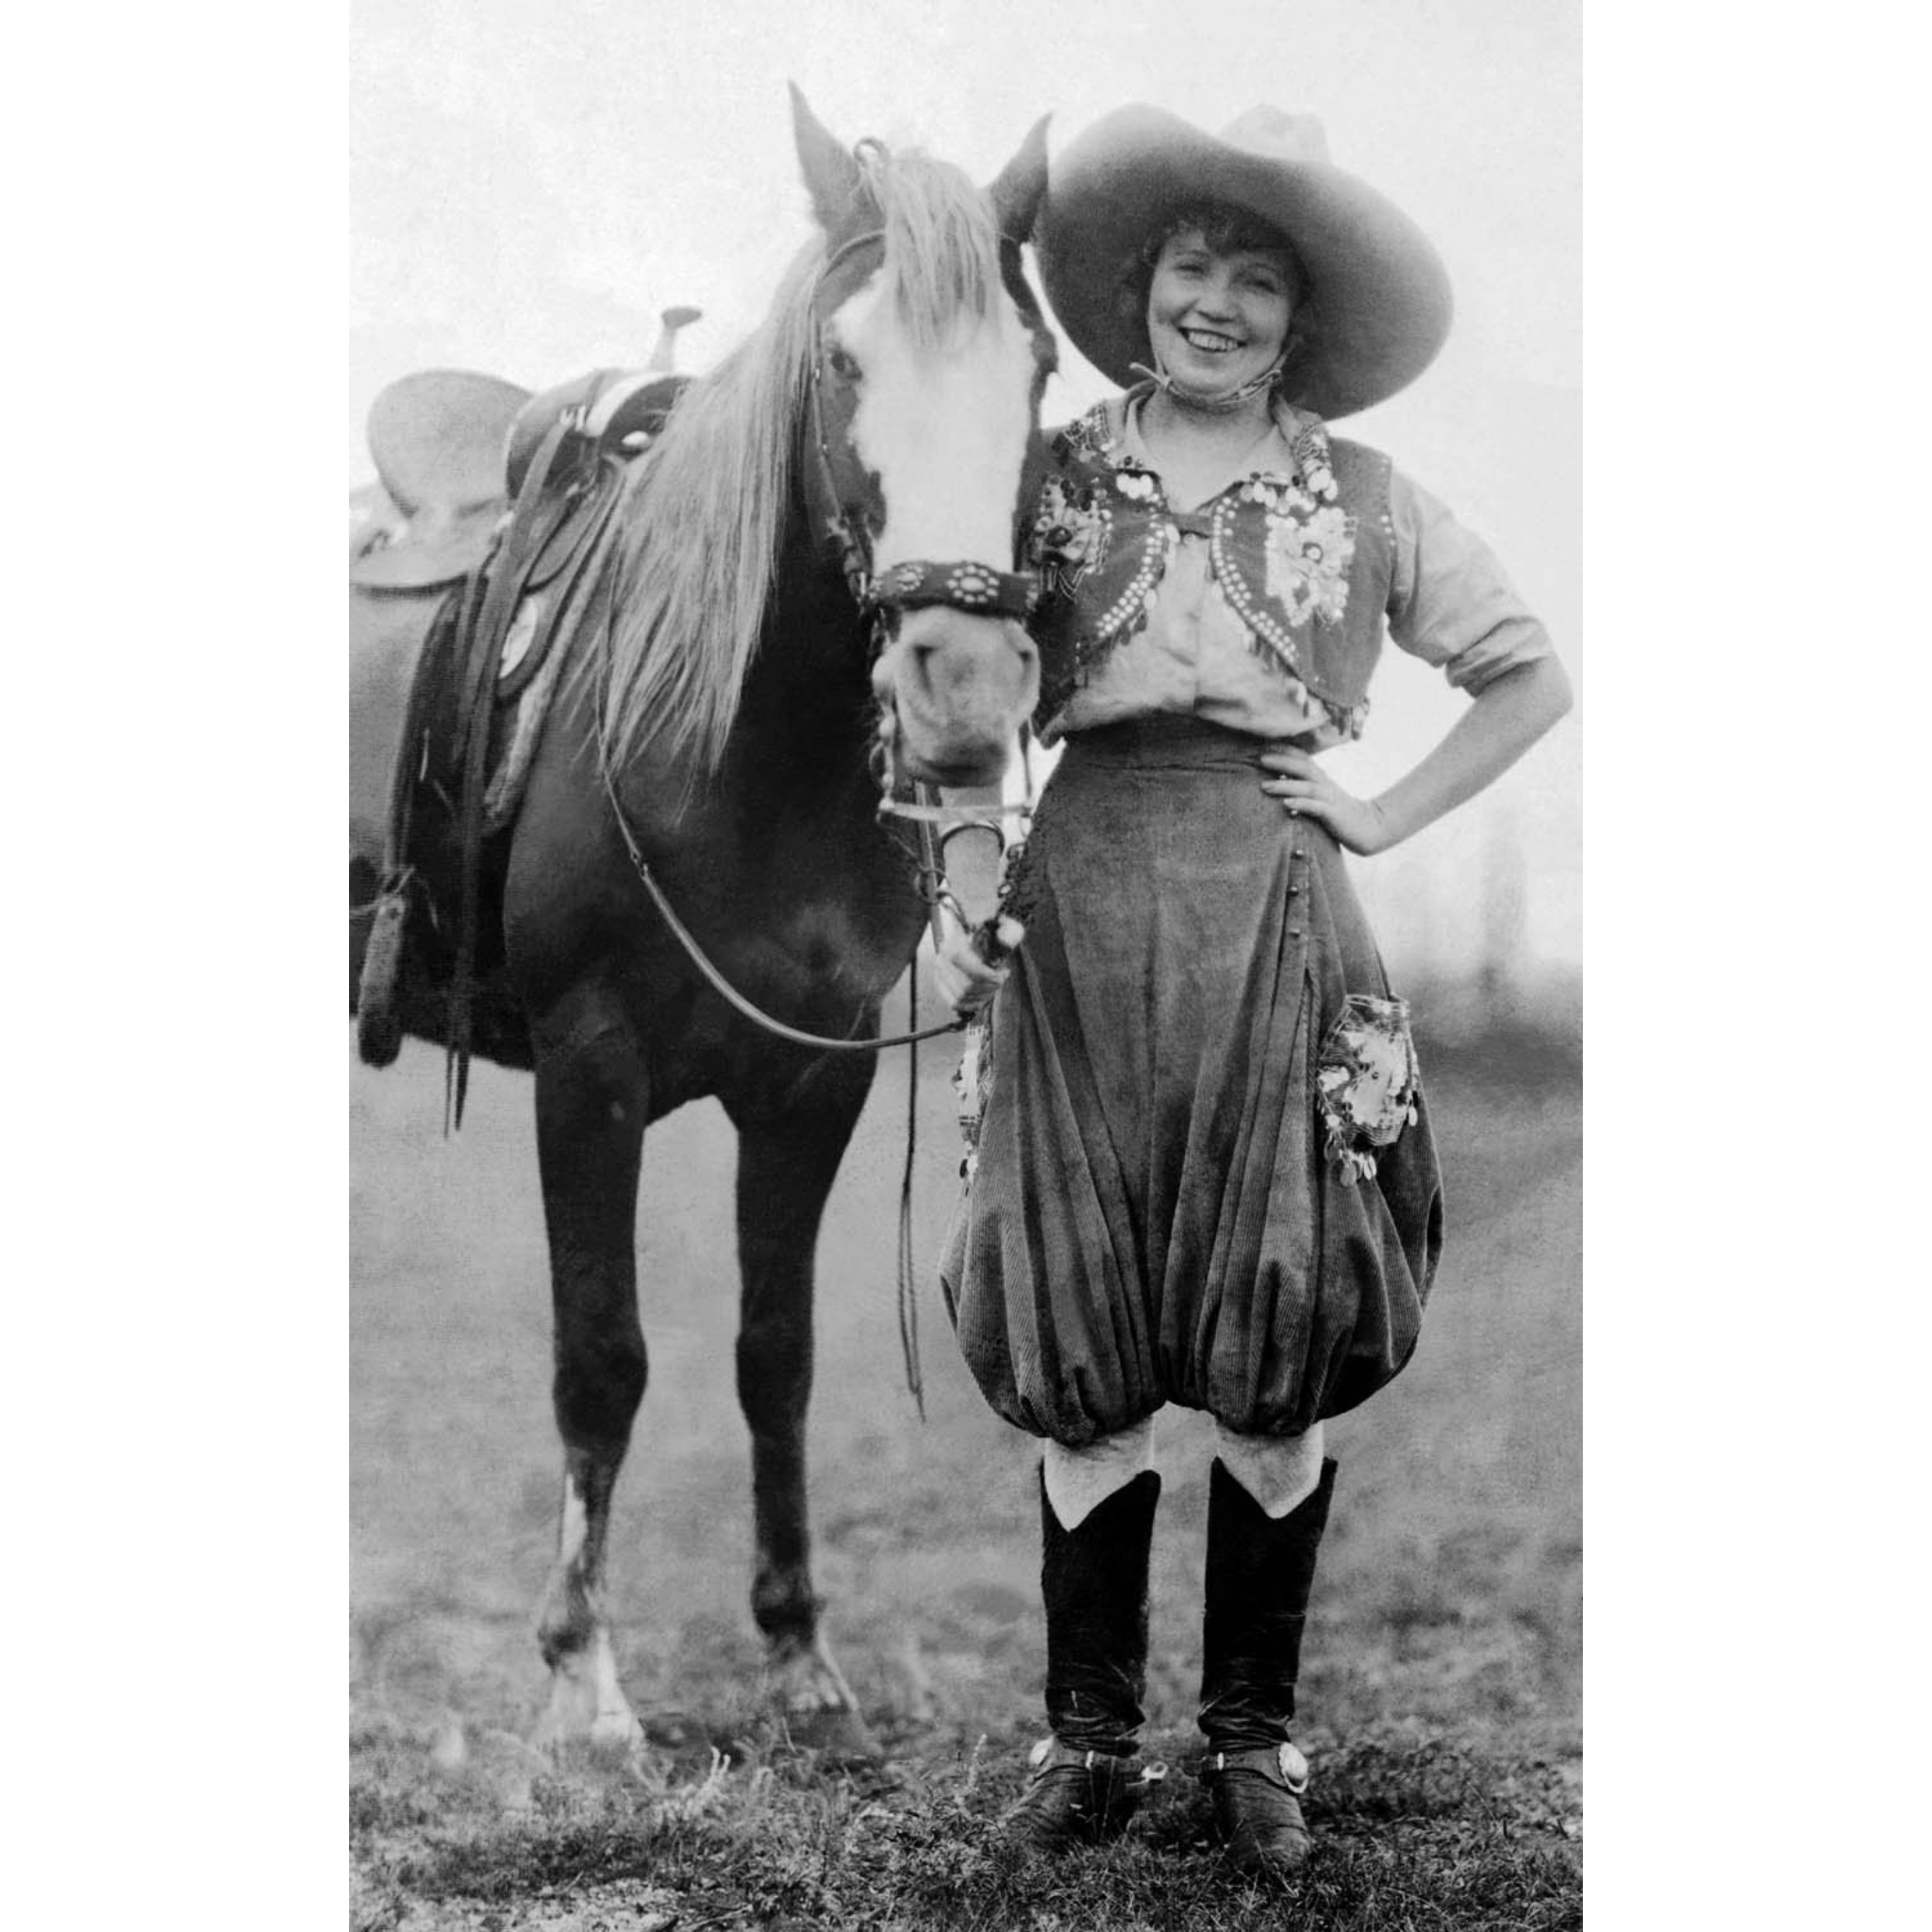 Prairie Rose and Horse - Doubleday - ca. 1925 Photograph